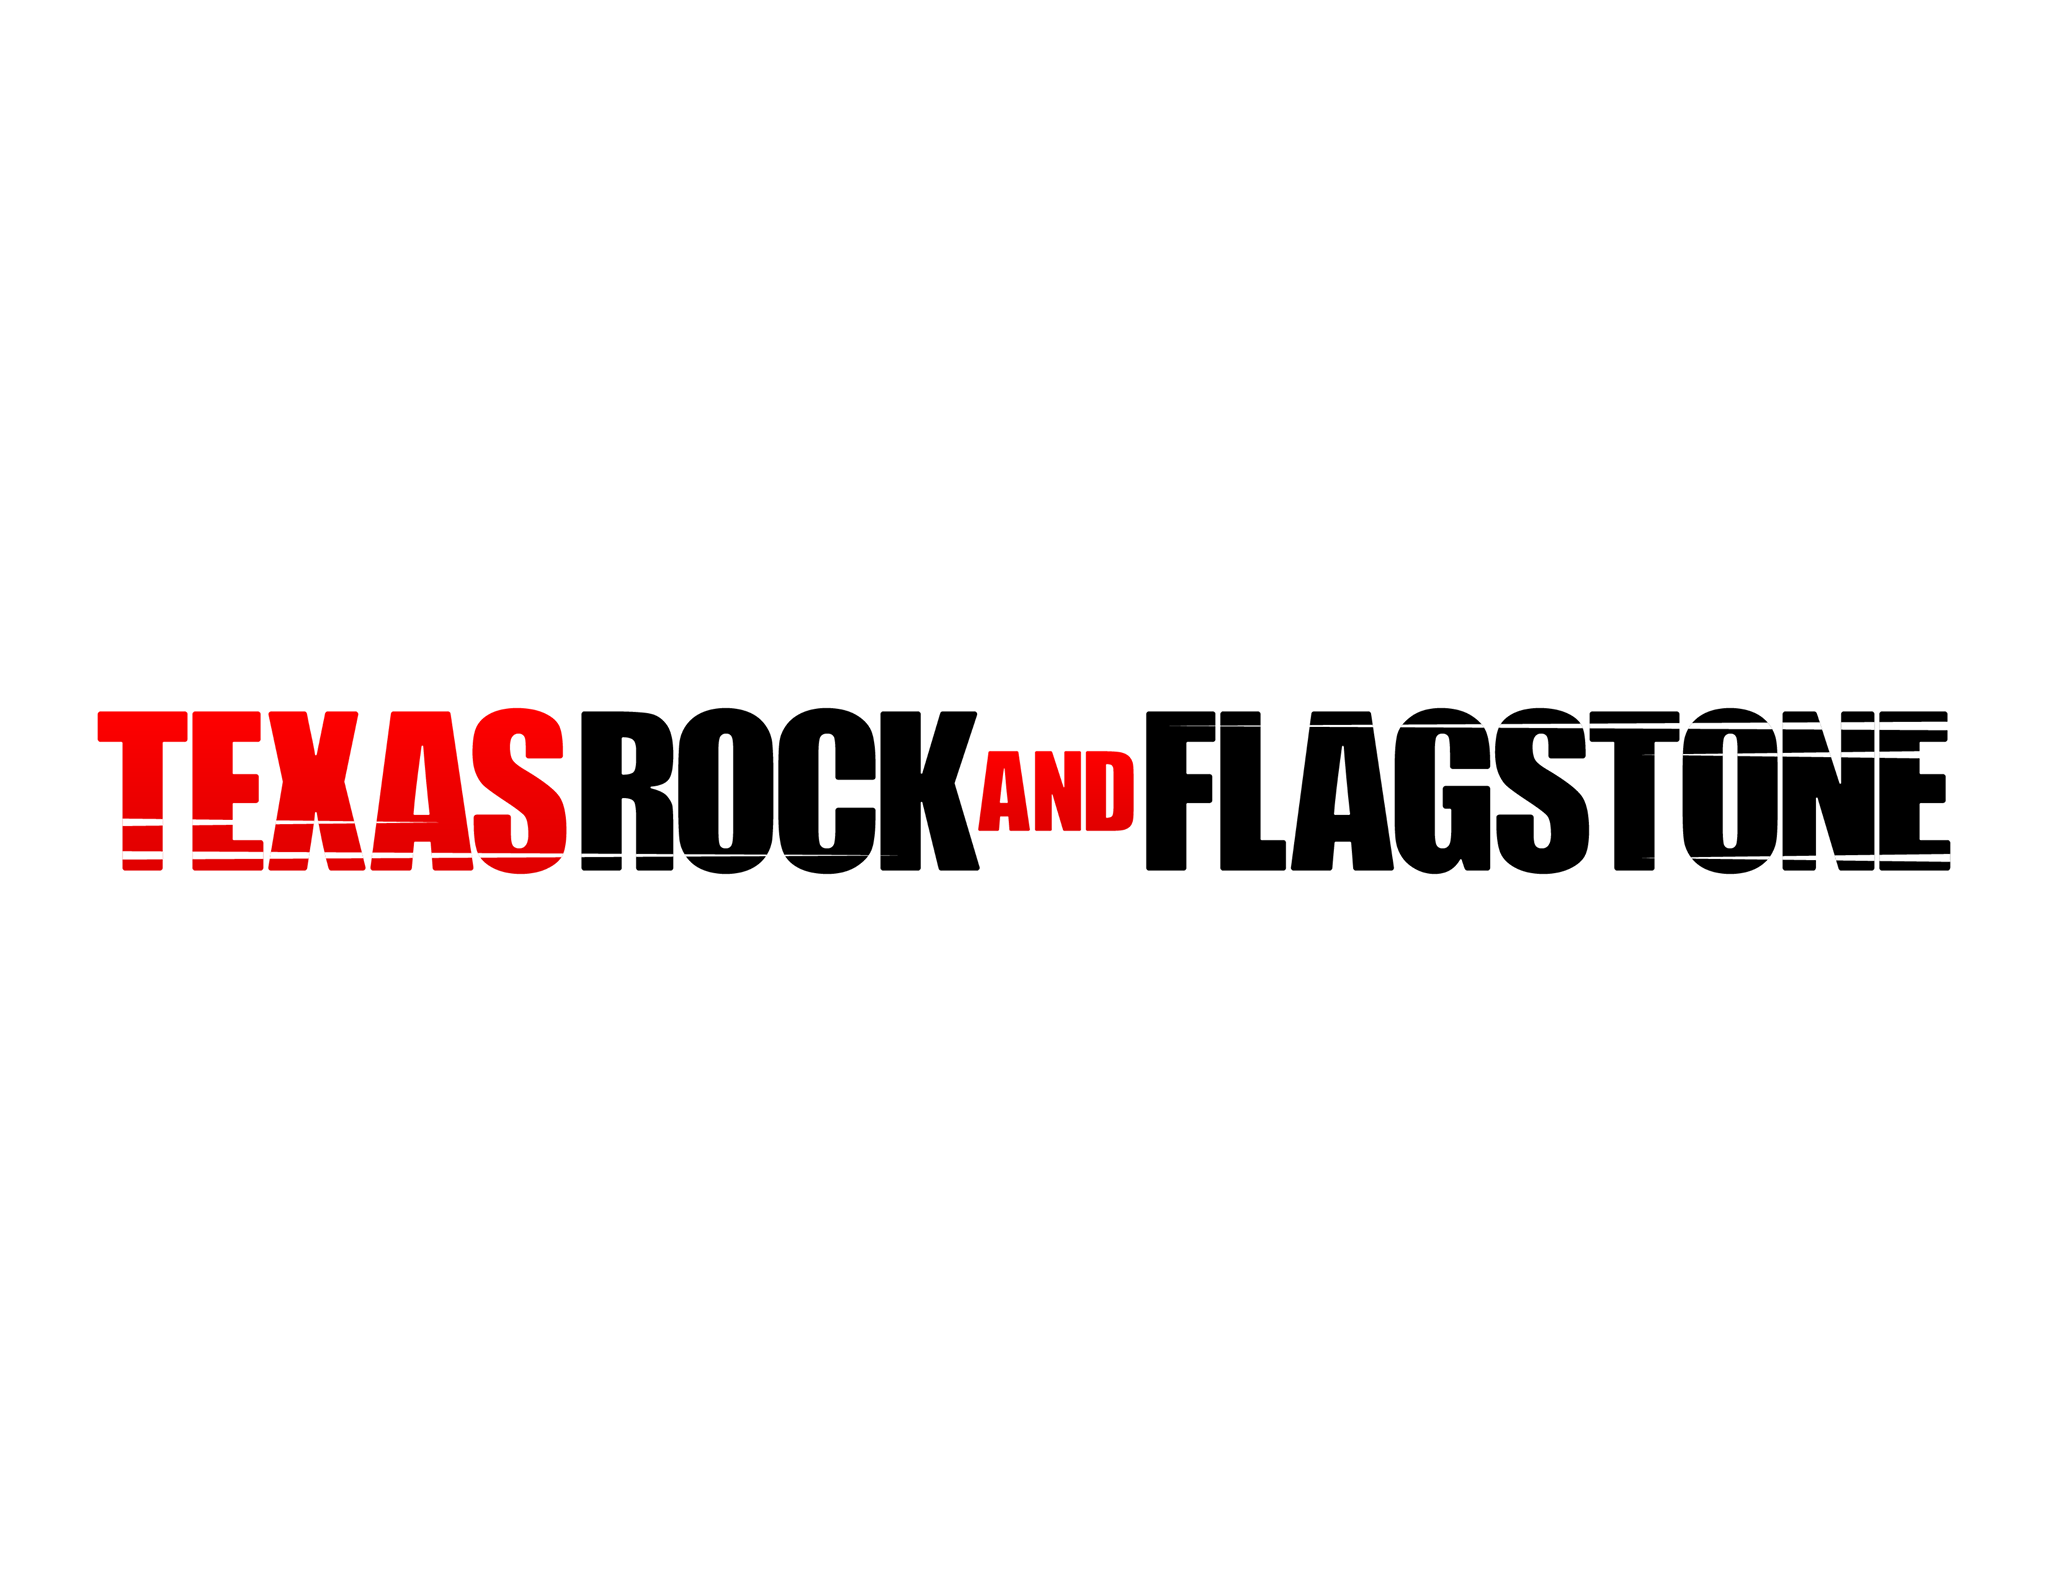 Business logo of Texas Rock and Flagstone